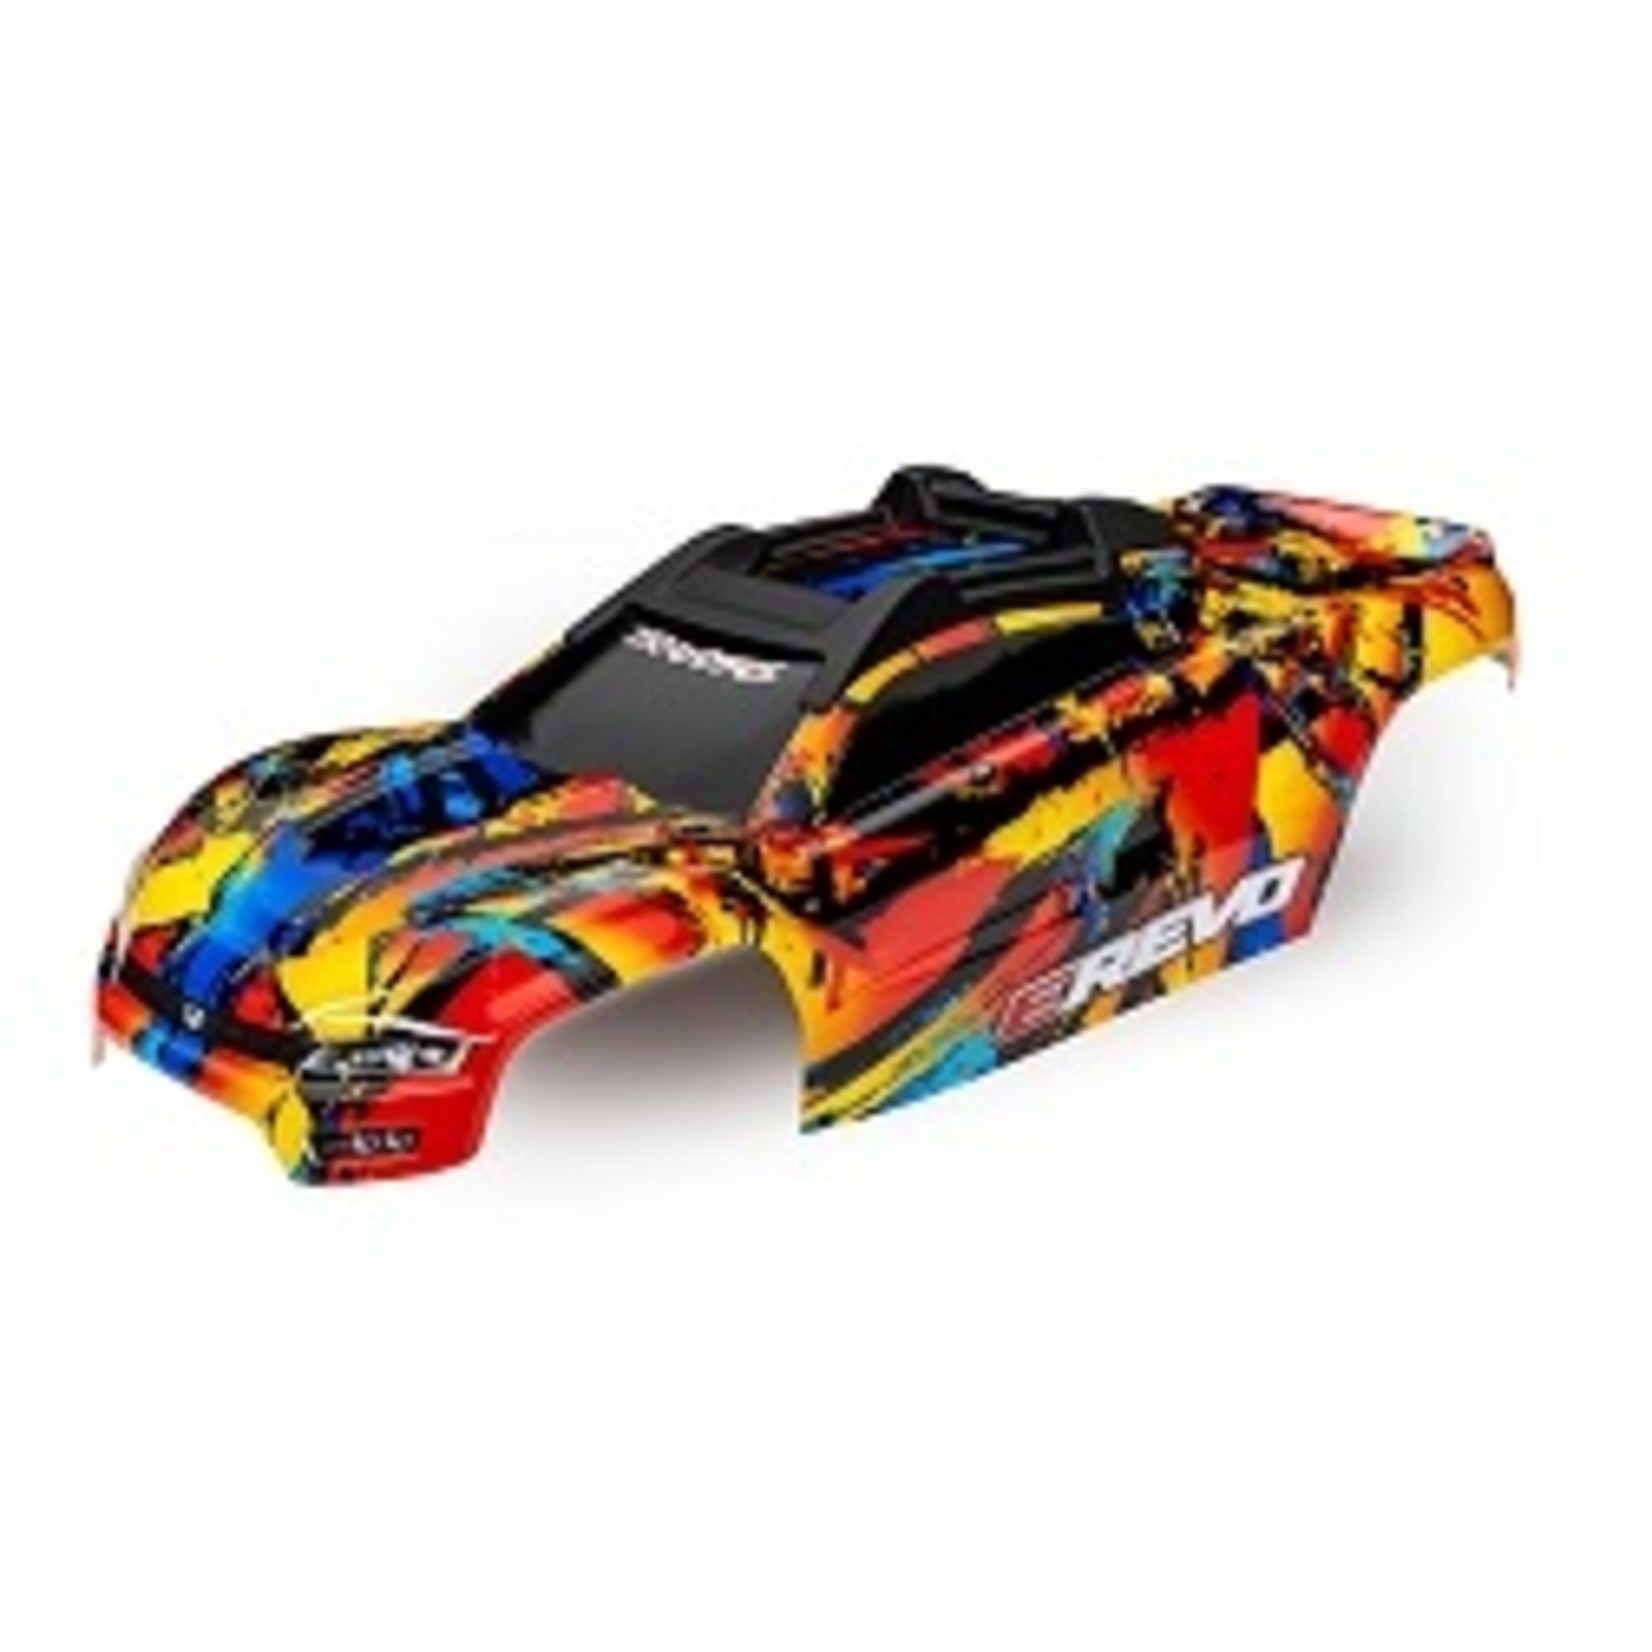 Traxxas Body, E-Revo®, Solar Flare (painted, decals applied) (assembled with front & rear body mounts and rear body support for clipless mounting)